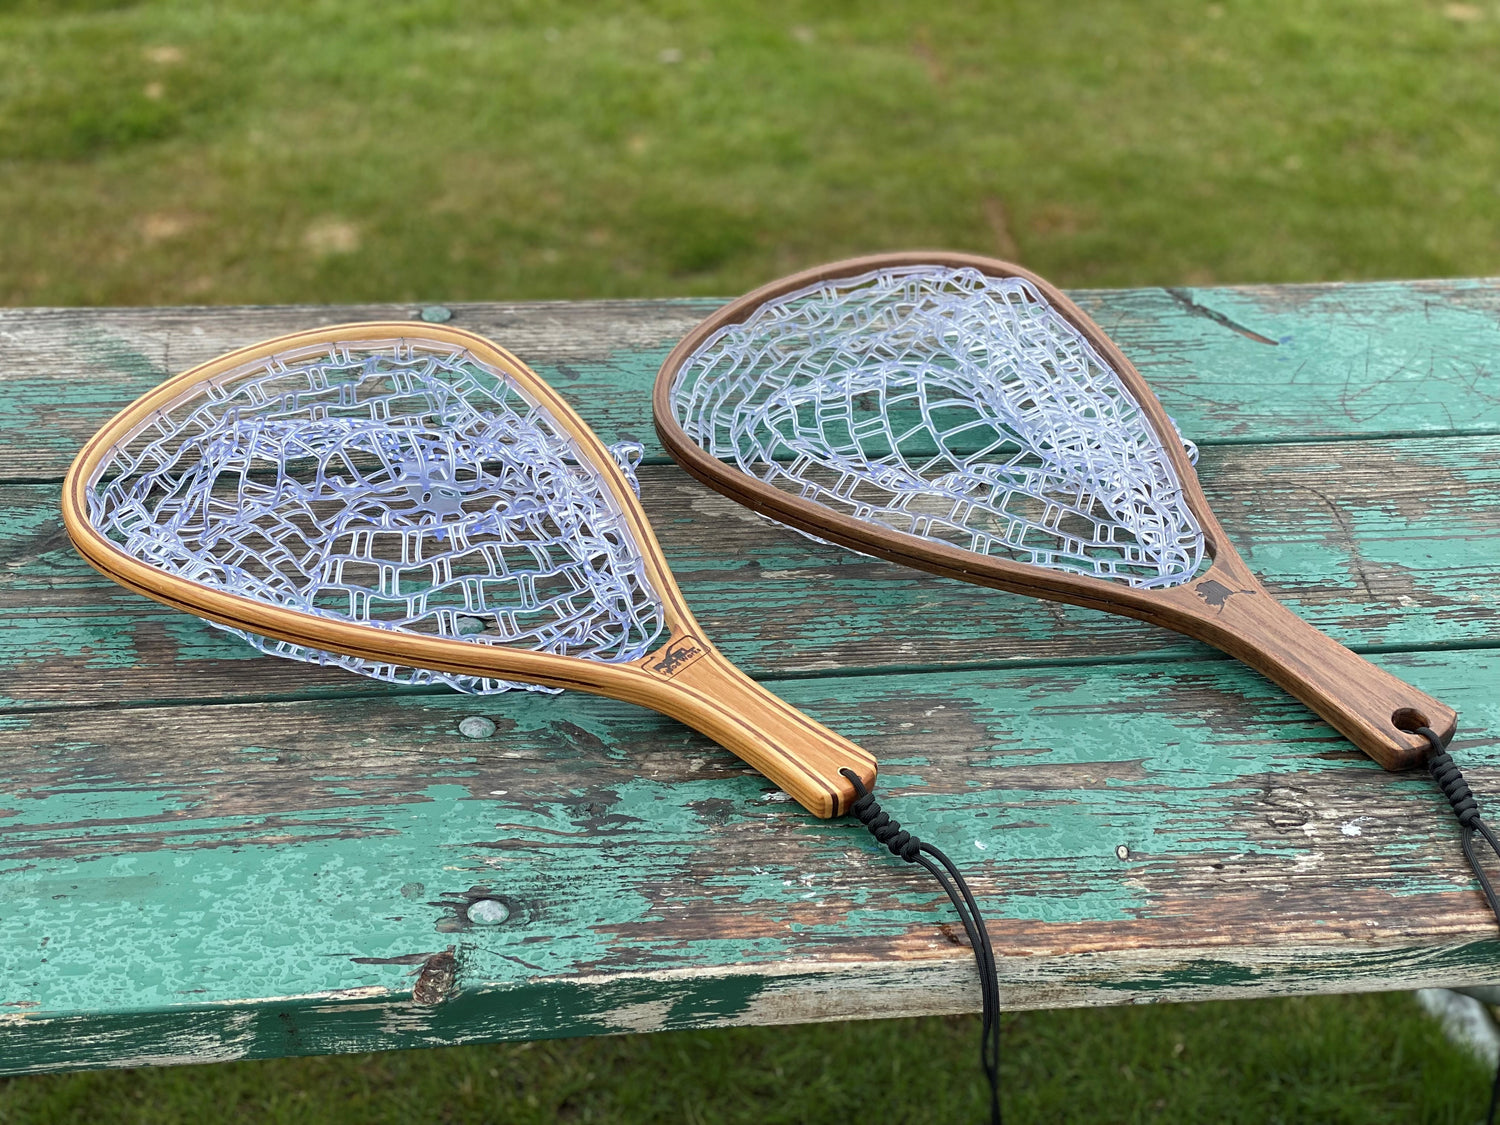 Wood Fly Fishing net - Handcrafted Custom Fly Fishing net made in the USA